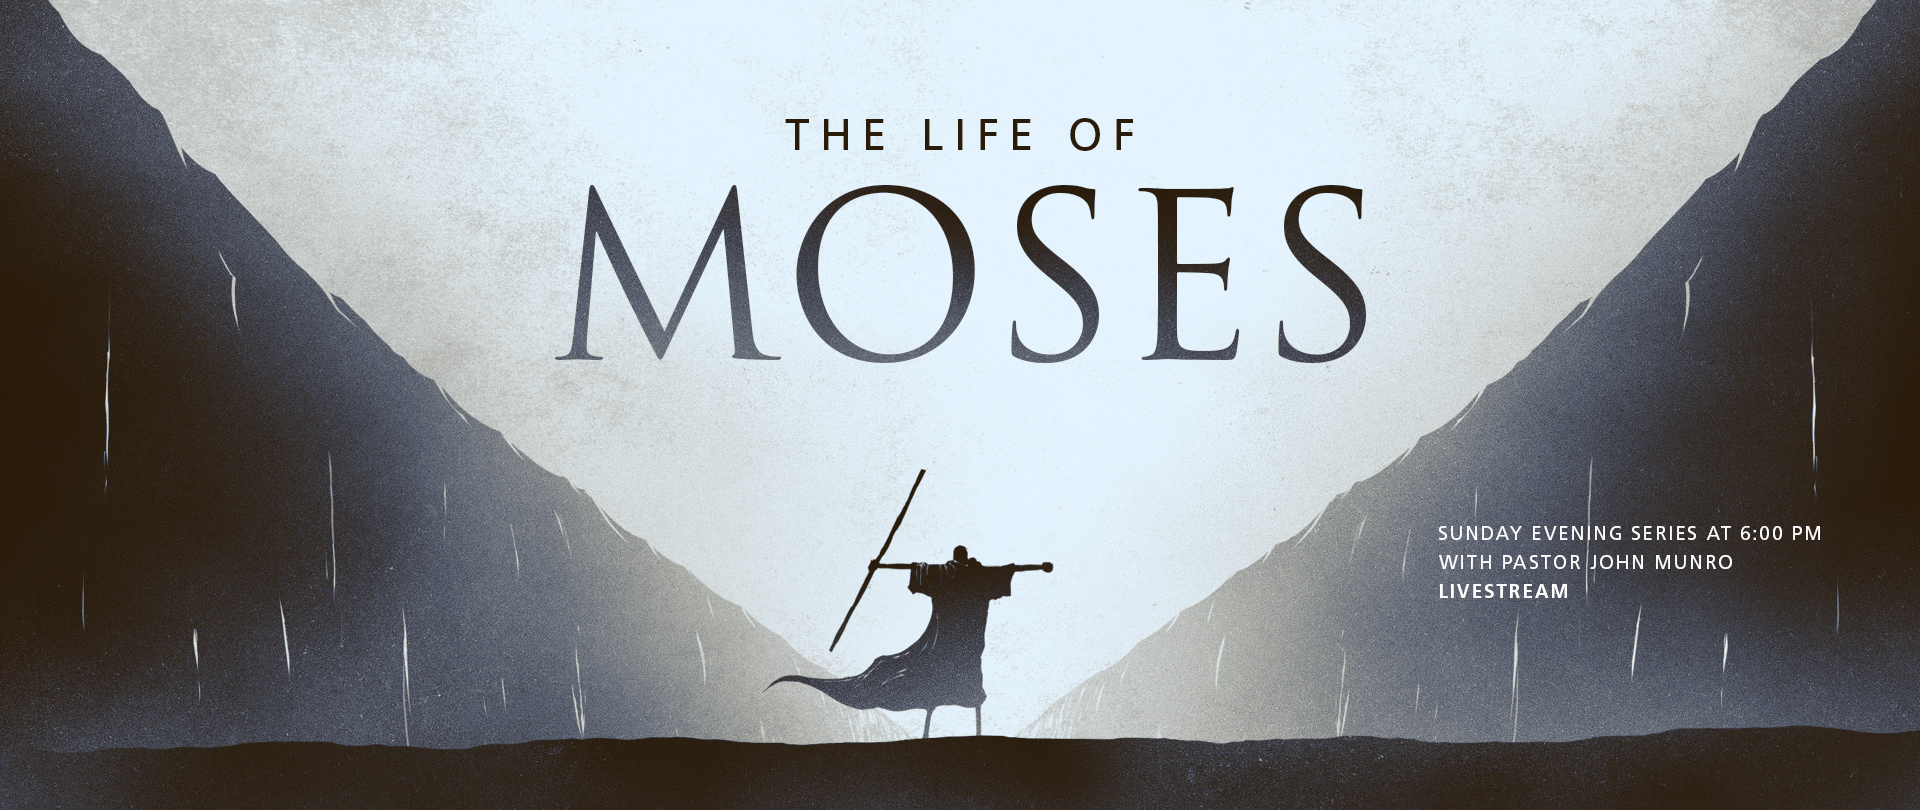 The Life of Moses
